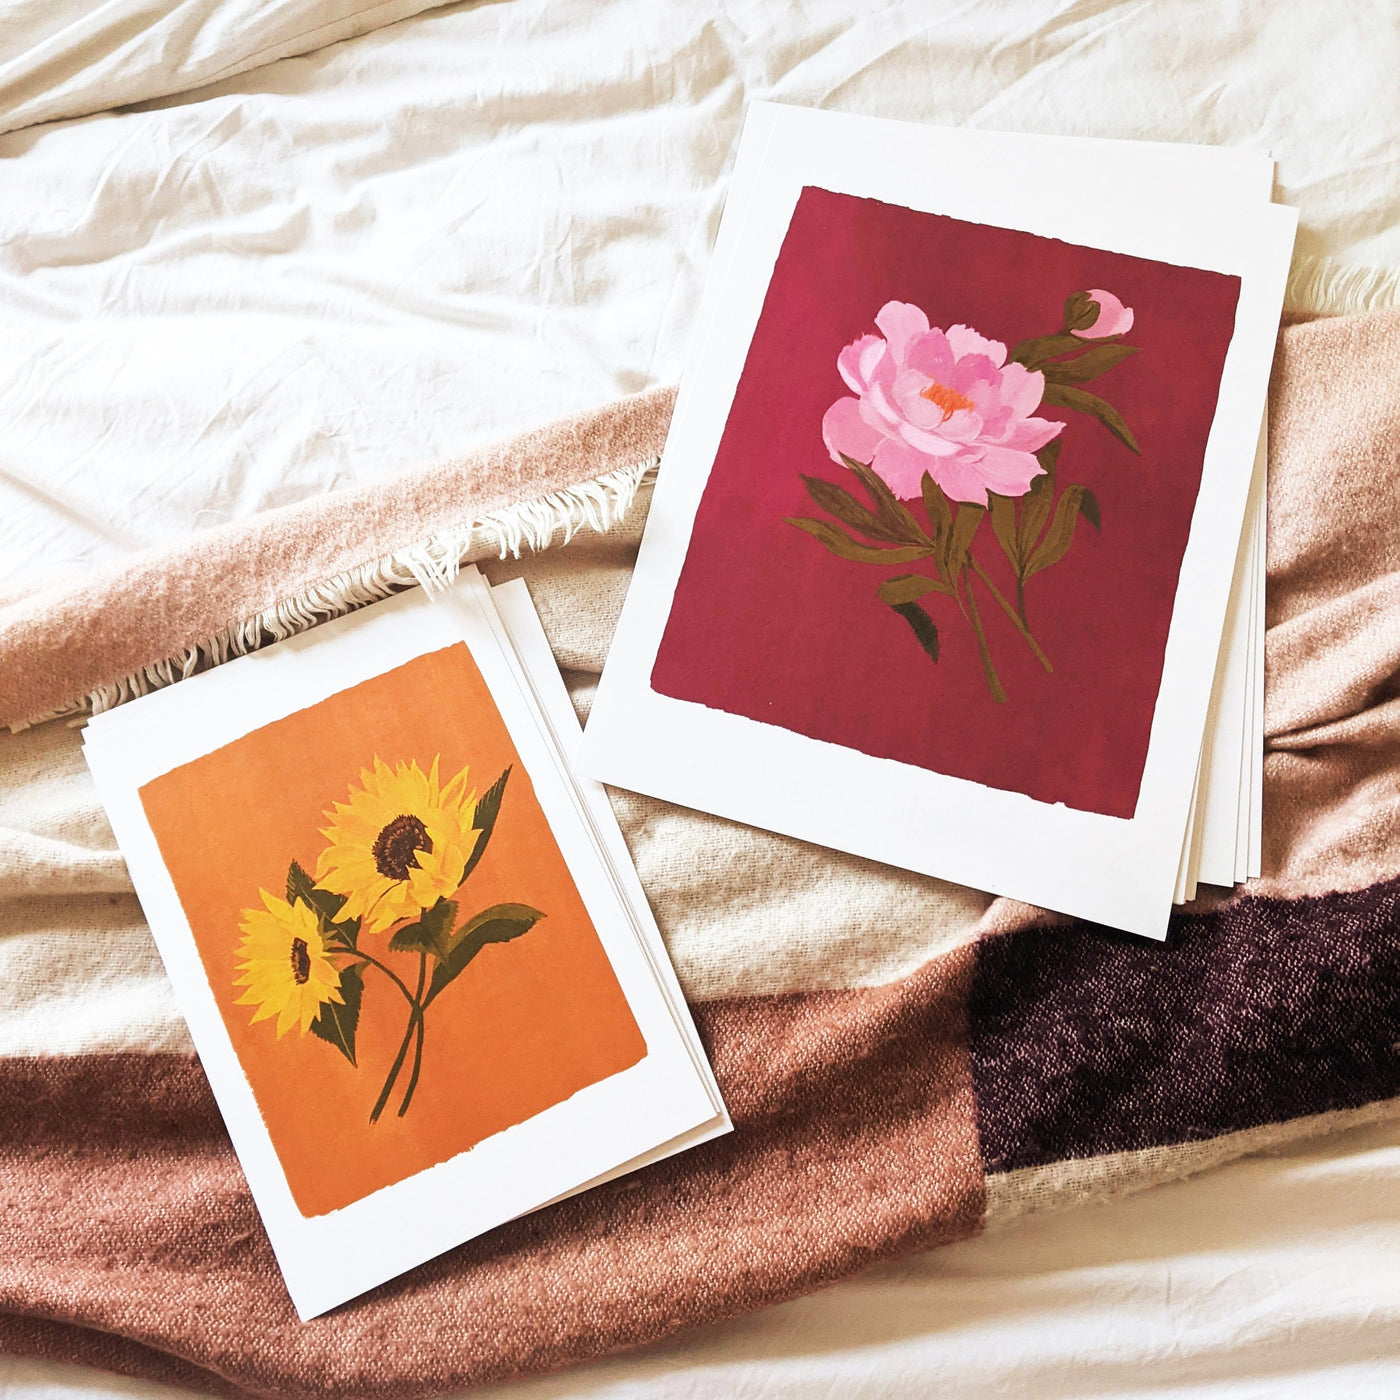 A Botanical Print Of A Pink Peony On A Burgundy Pink Background On A Blanket With A Sunflower Print - Annie Dornan Smith